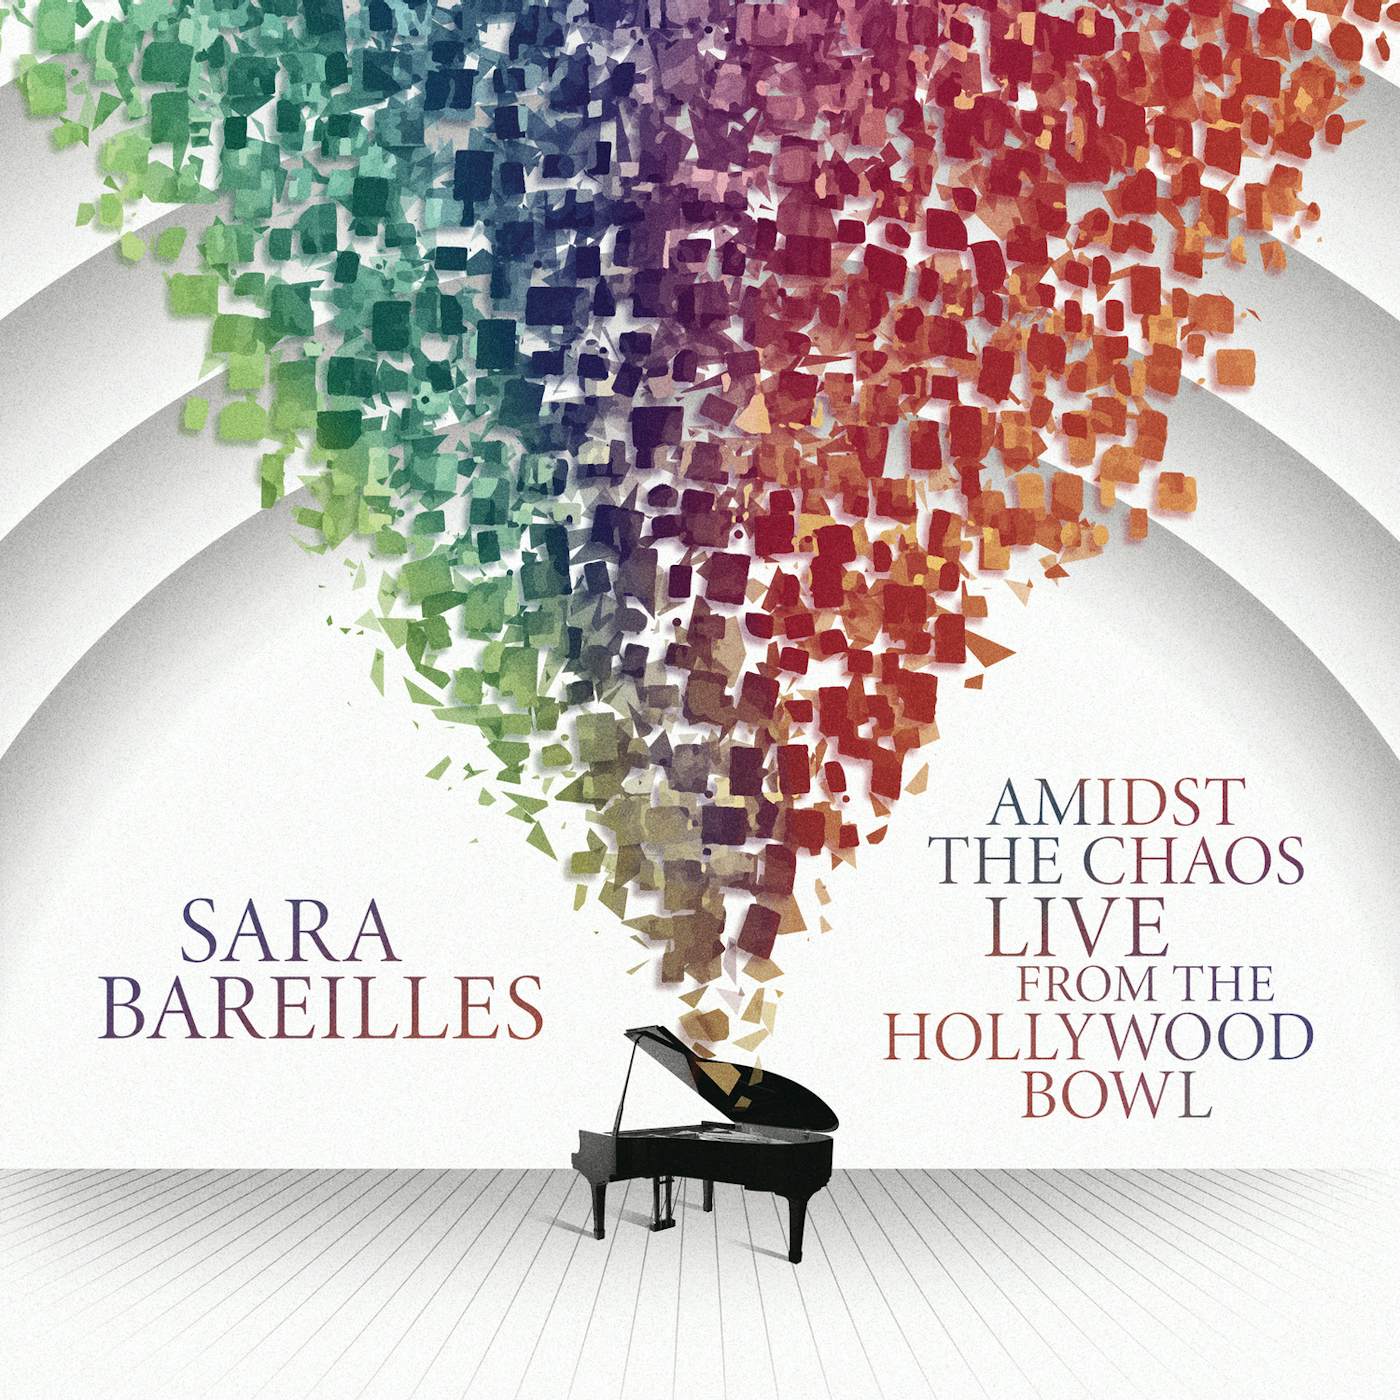 Sara Bareilles AMIDST THE CHAOS: LIVE FROM THE HOLLYWOOD BOWL (3LP/150G) Vinyl Record